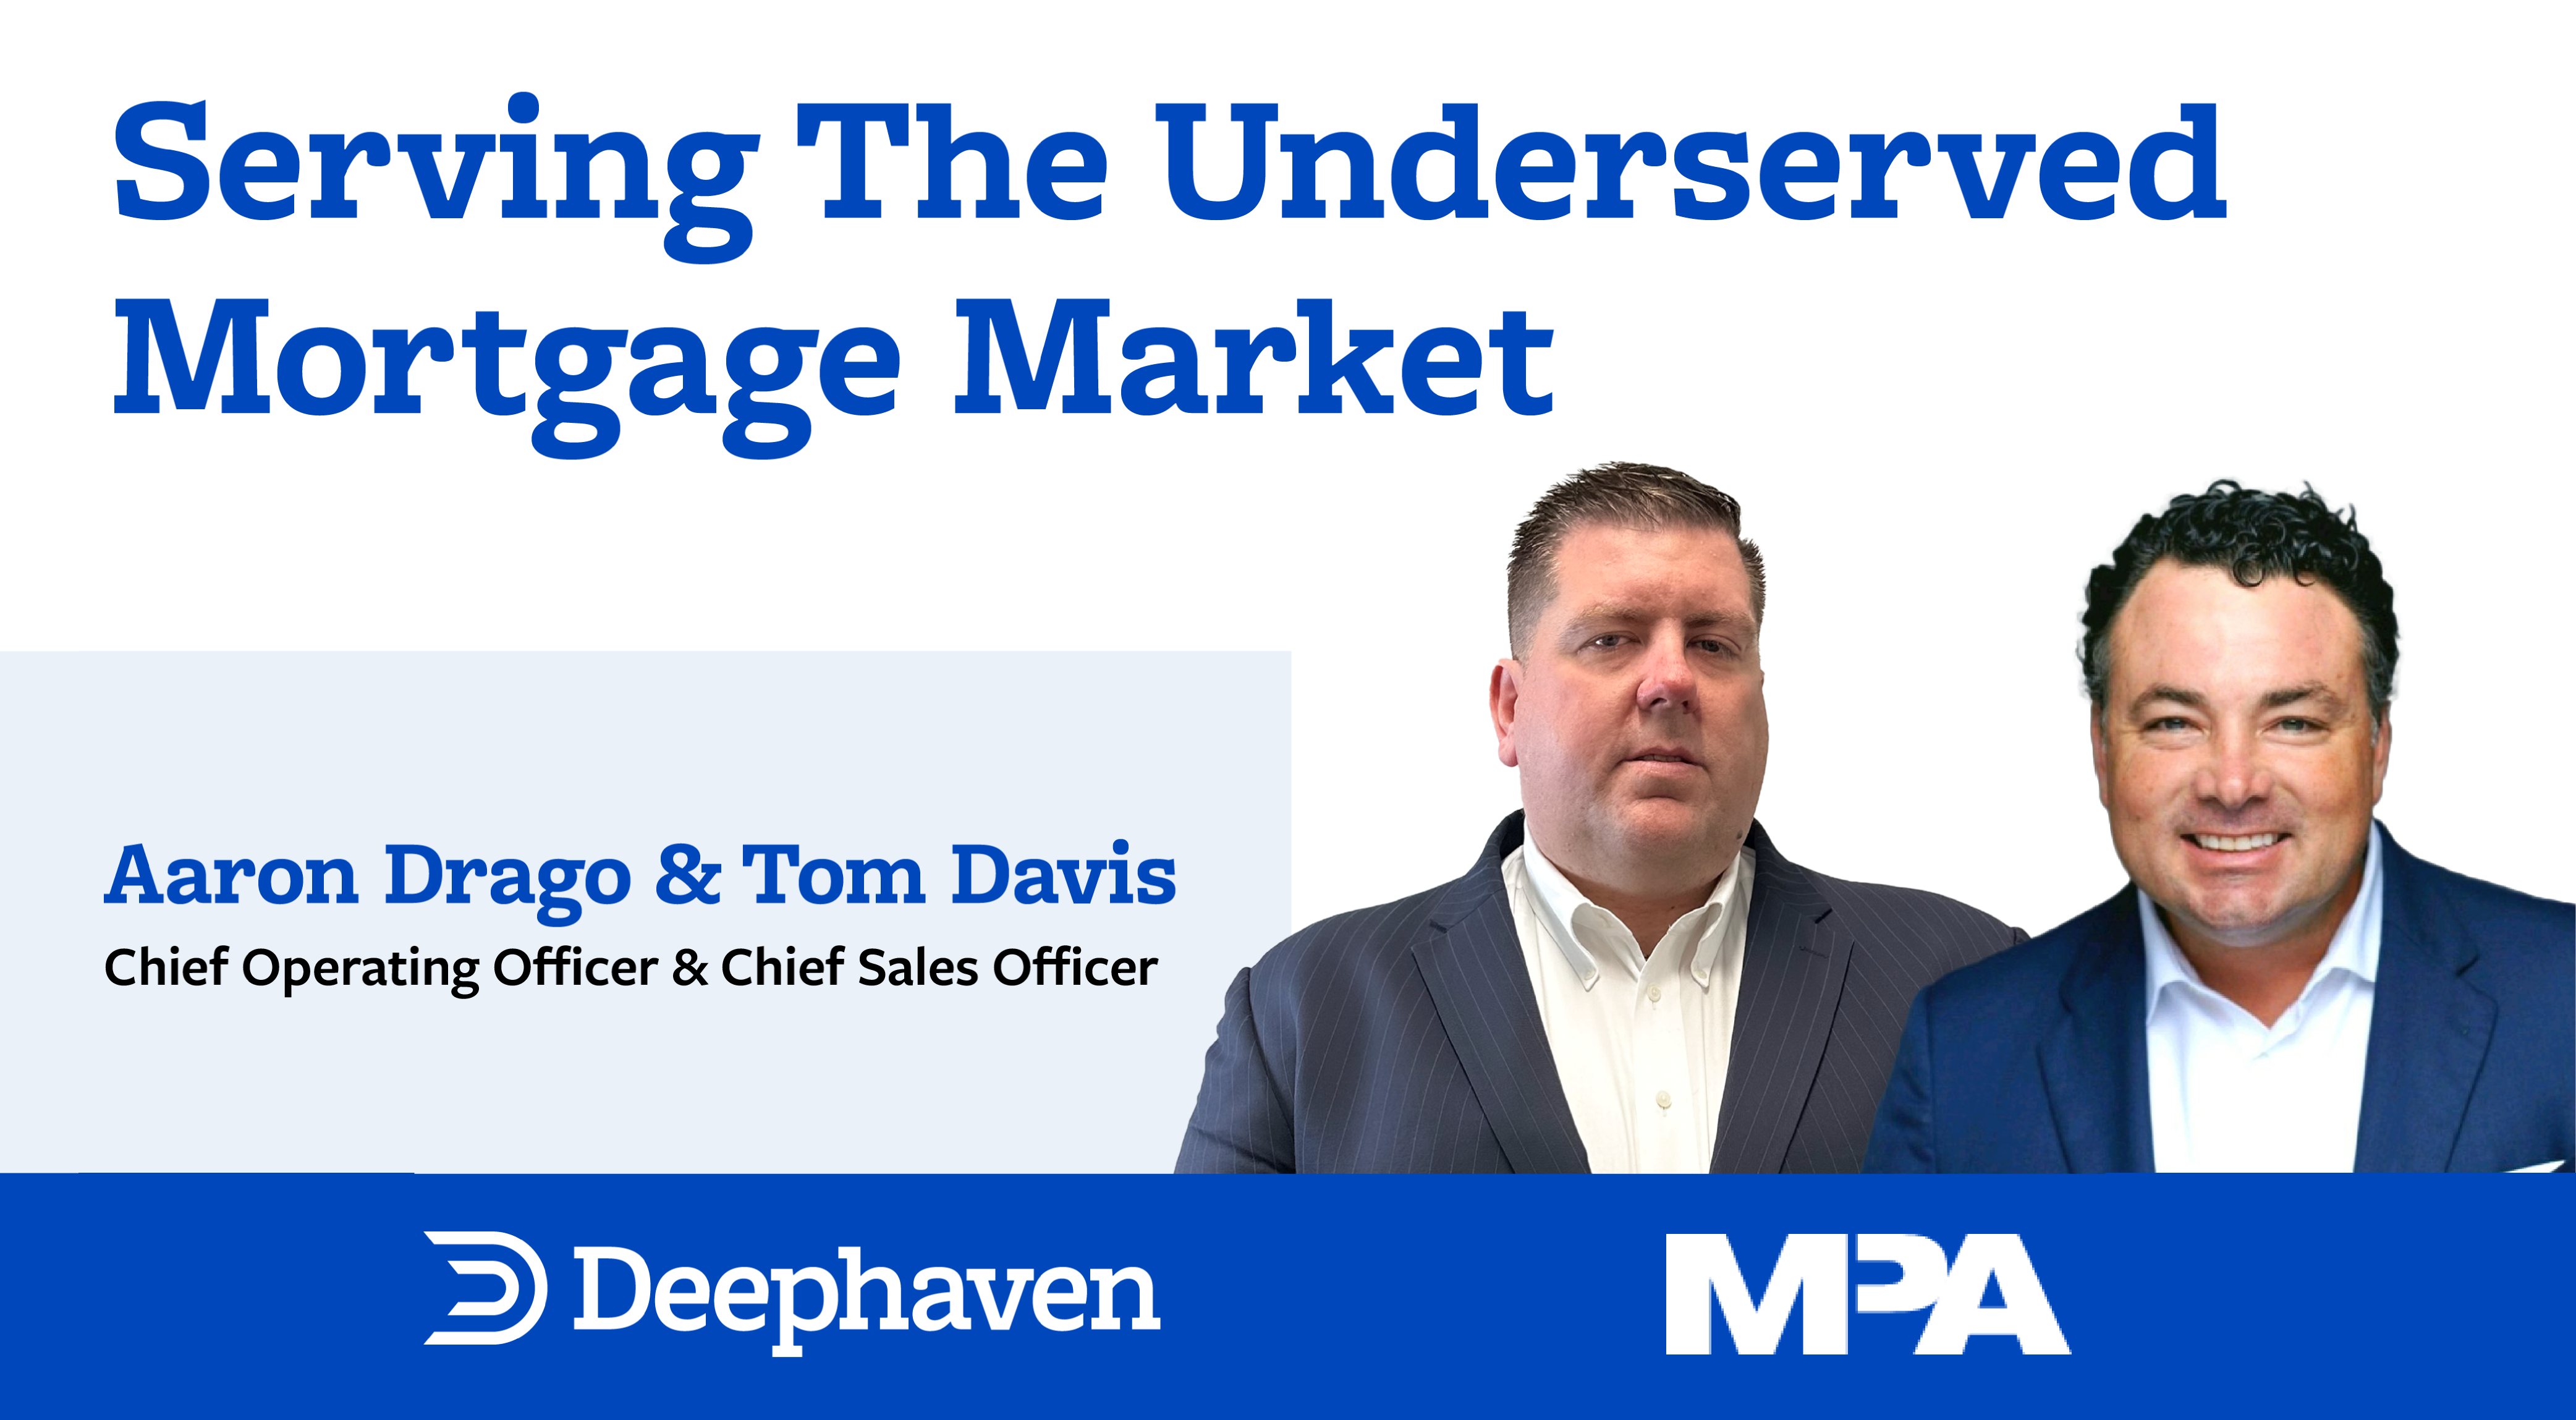 Deephaven Mortgage serves the underserved in the mortgage market, through out-of-the-box thinking to get Non-QM borrowers qualified.